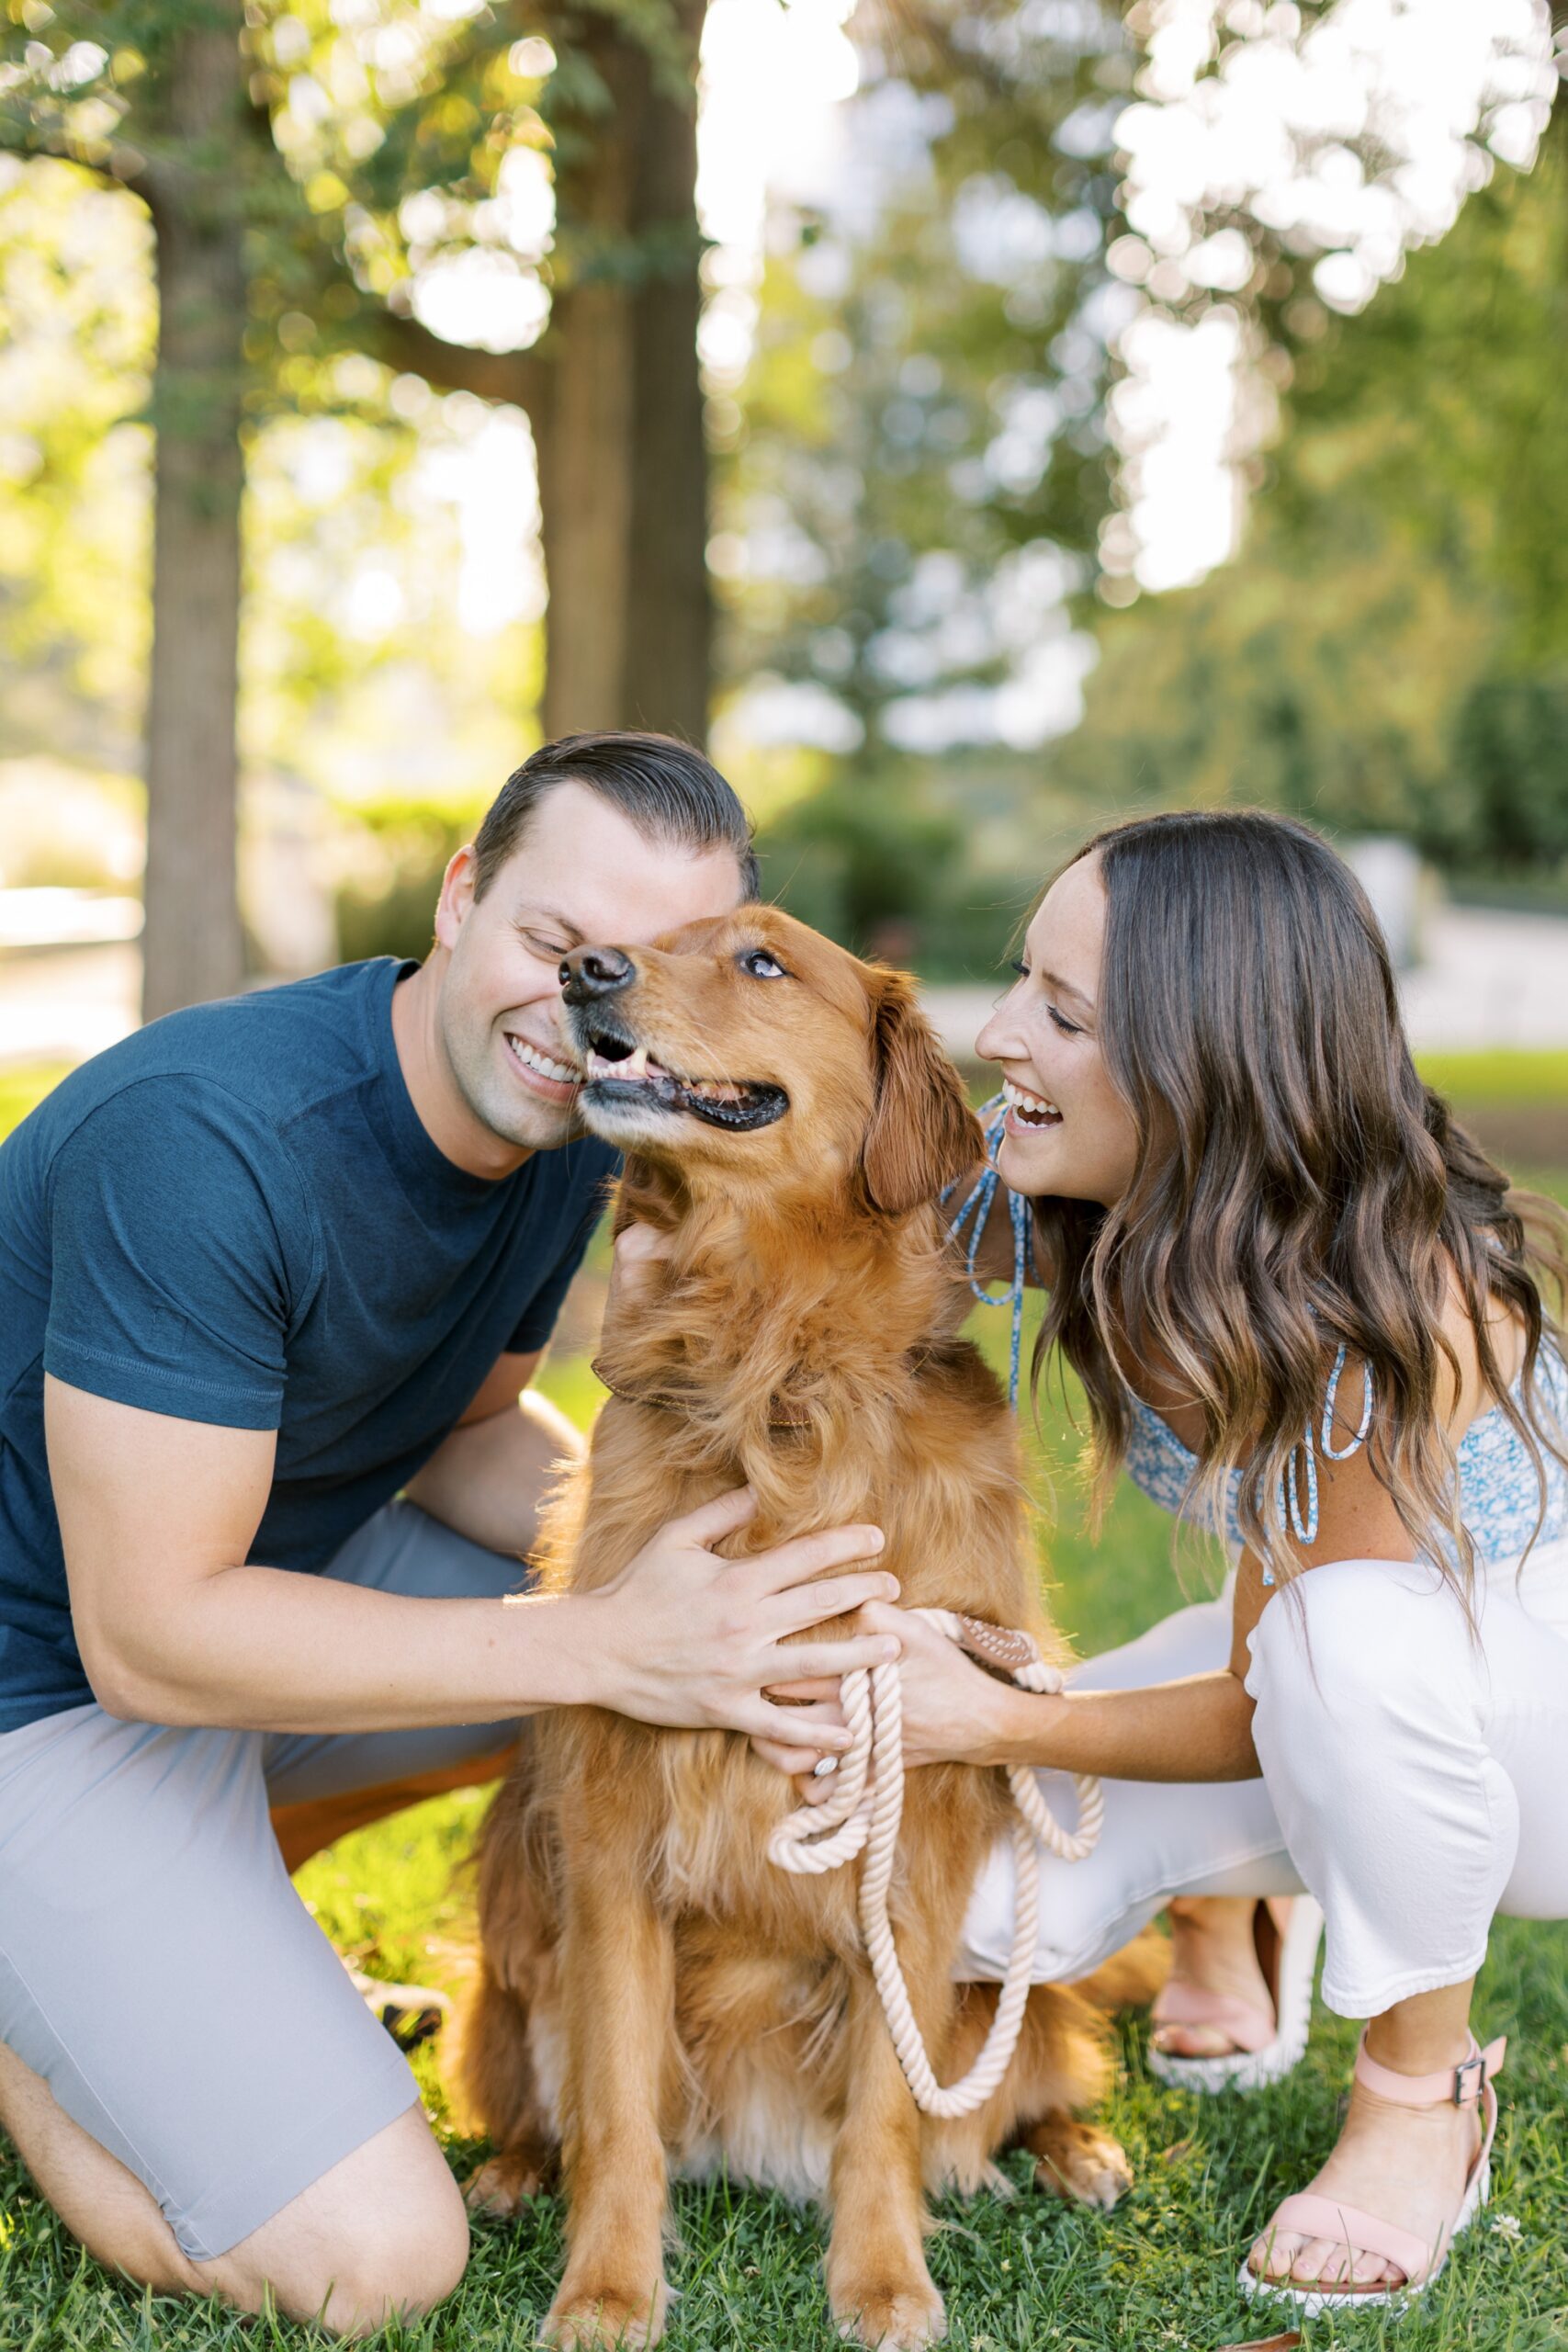 These were the sweetest engagement photos with a Golden Retriever